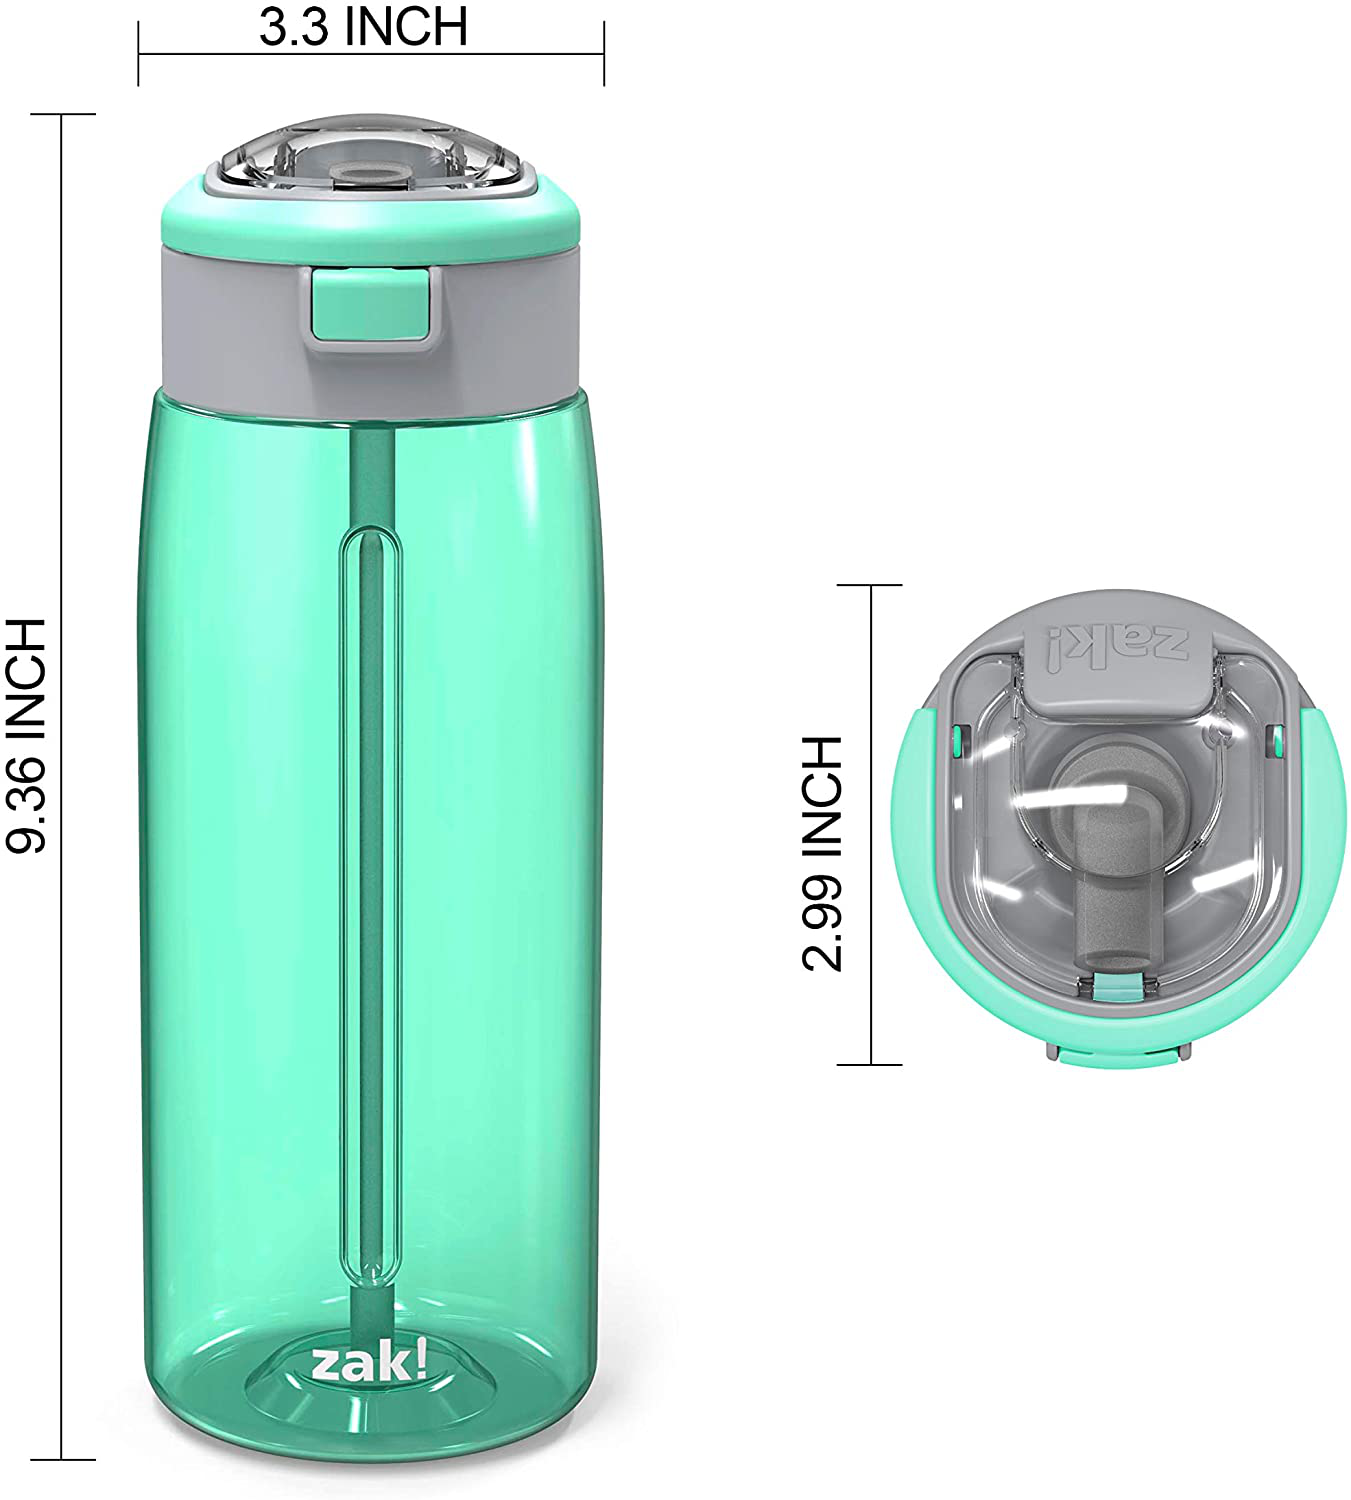 Zak Designs Genesis Durable Plastic Water Bottle with Interchangeable Lid and Built-In Carry Handle, Leak-Proof Design is Perfect for Outdoor Sports (64oz, Indigo)